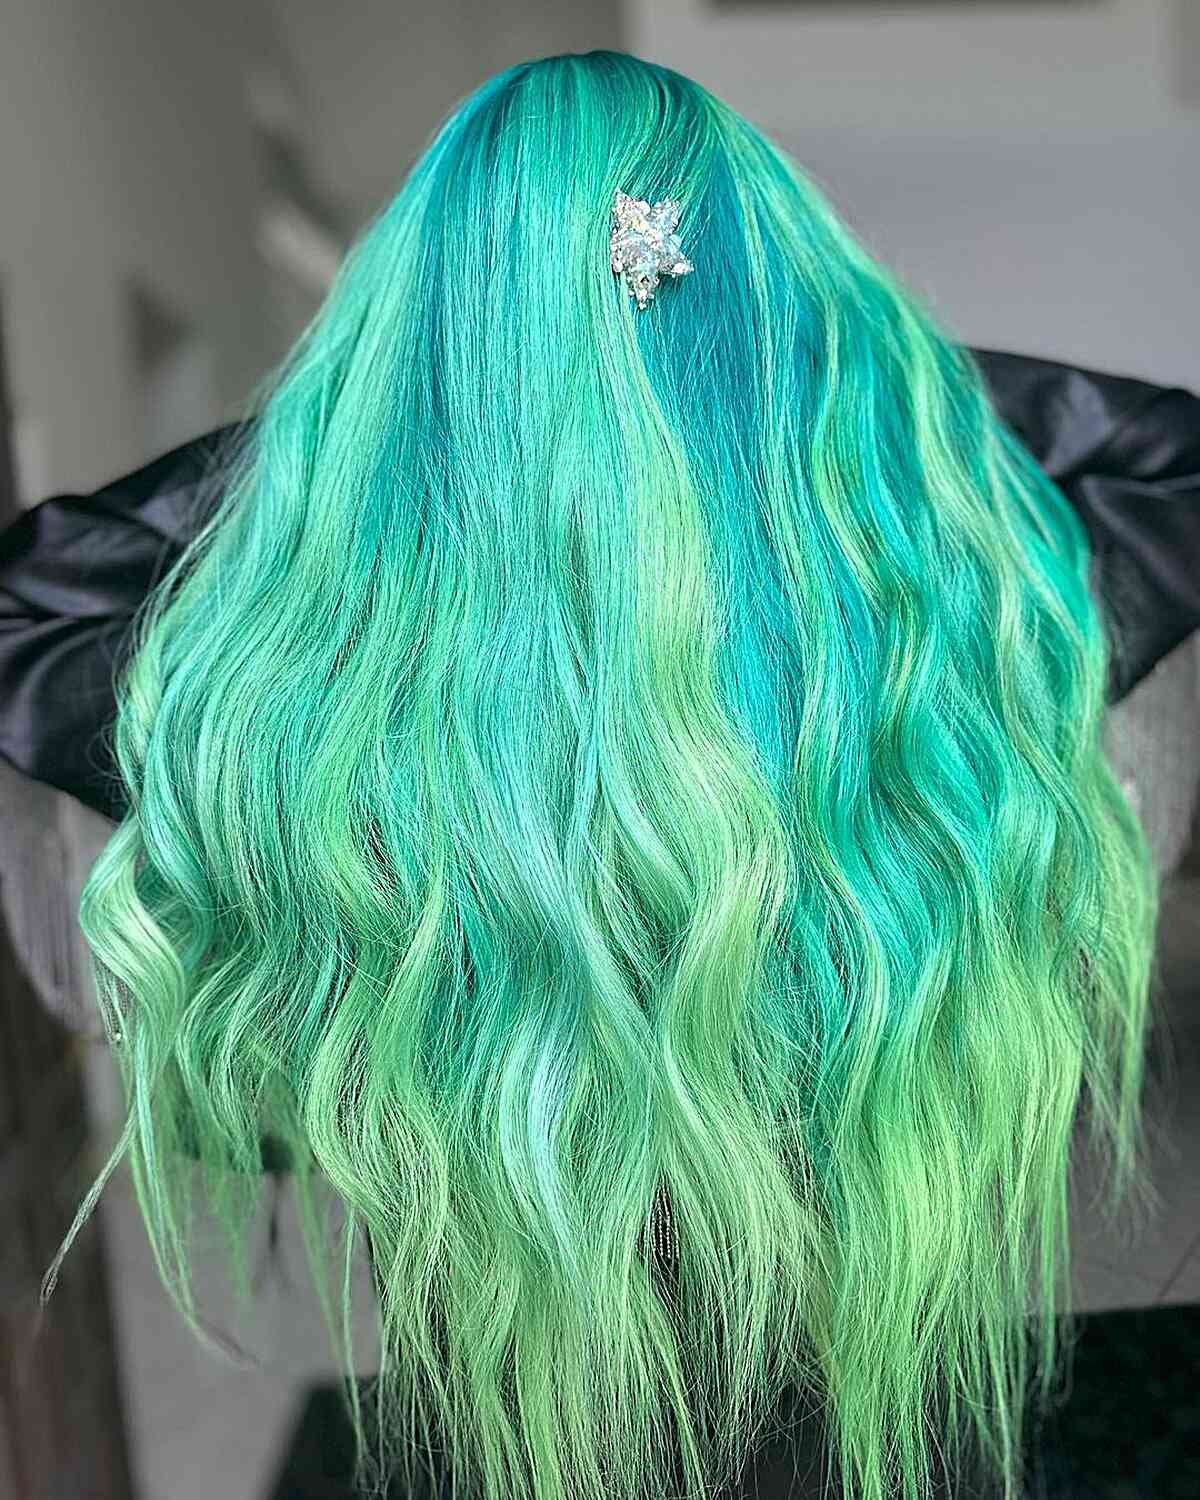 Hair color reminiscent of a mermaid’s tail in shades of green